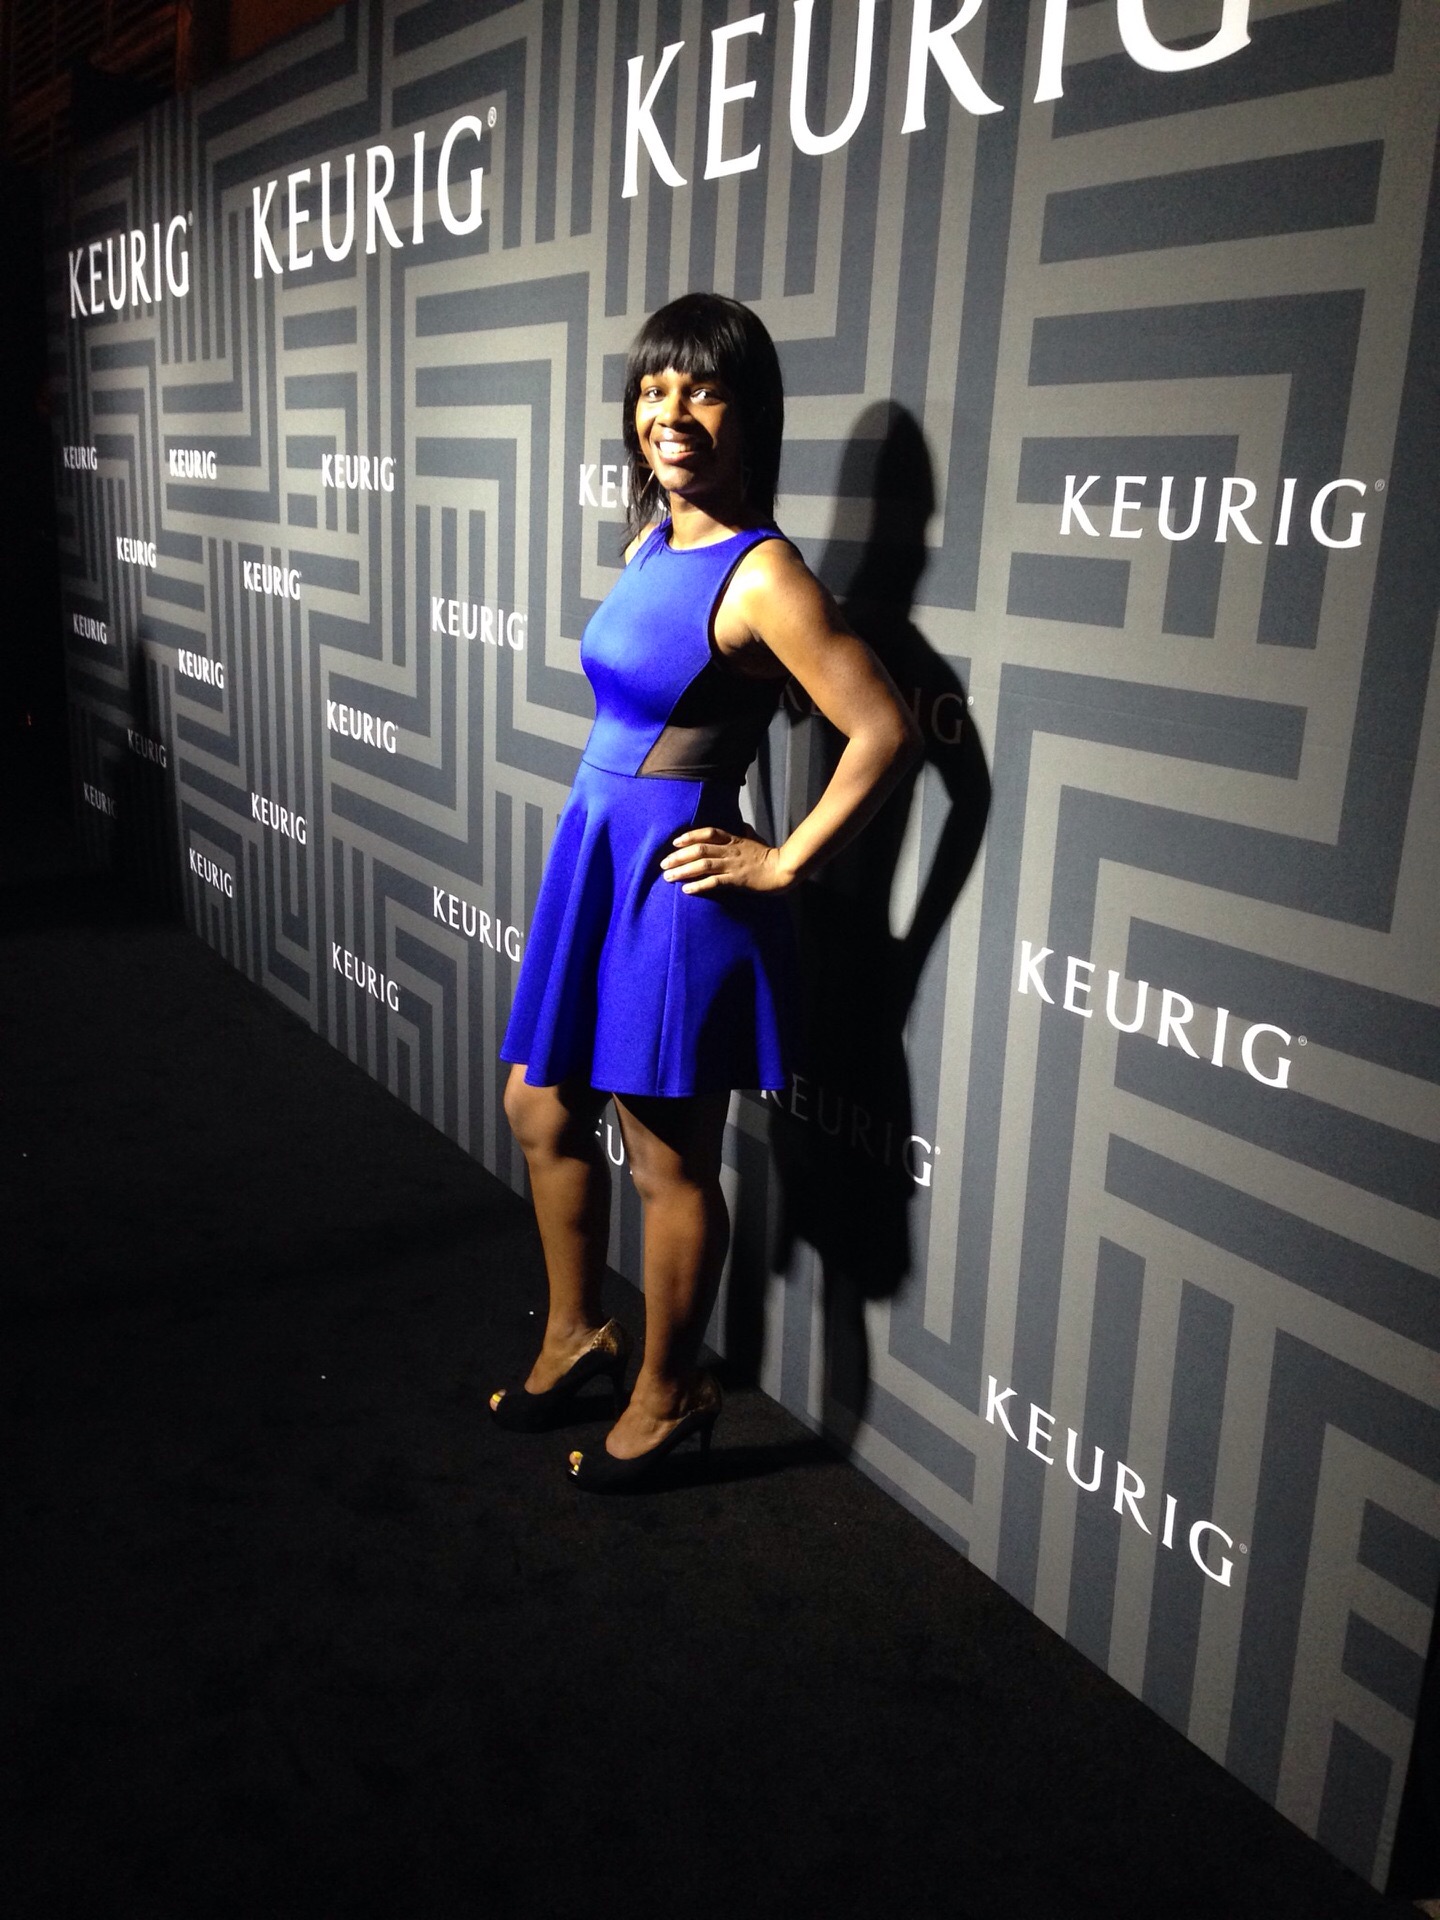 Keurig Grammys 2015 After-Party